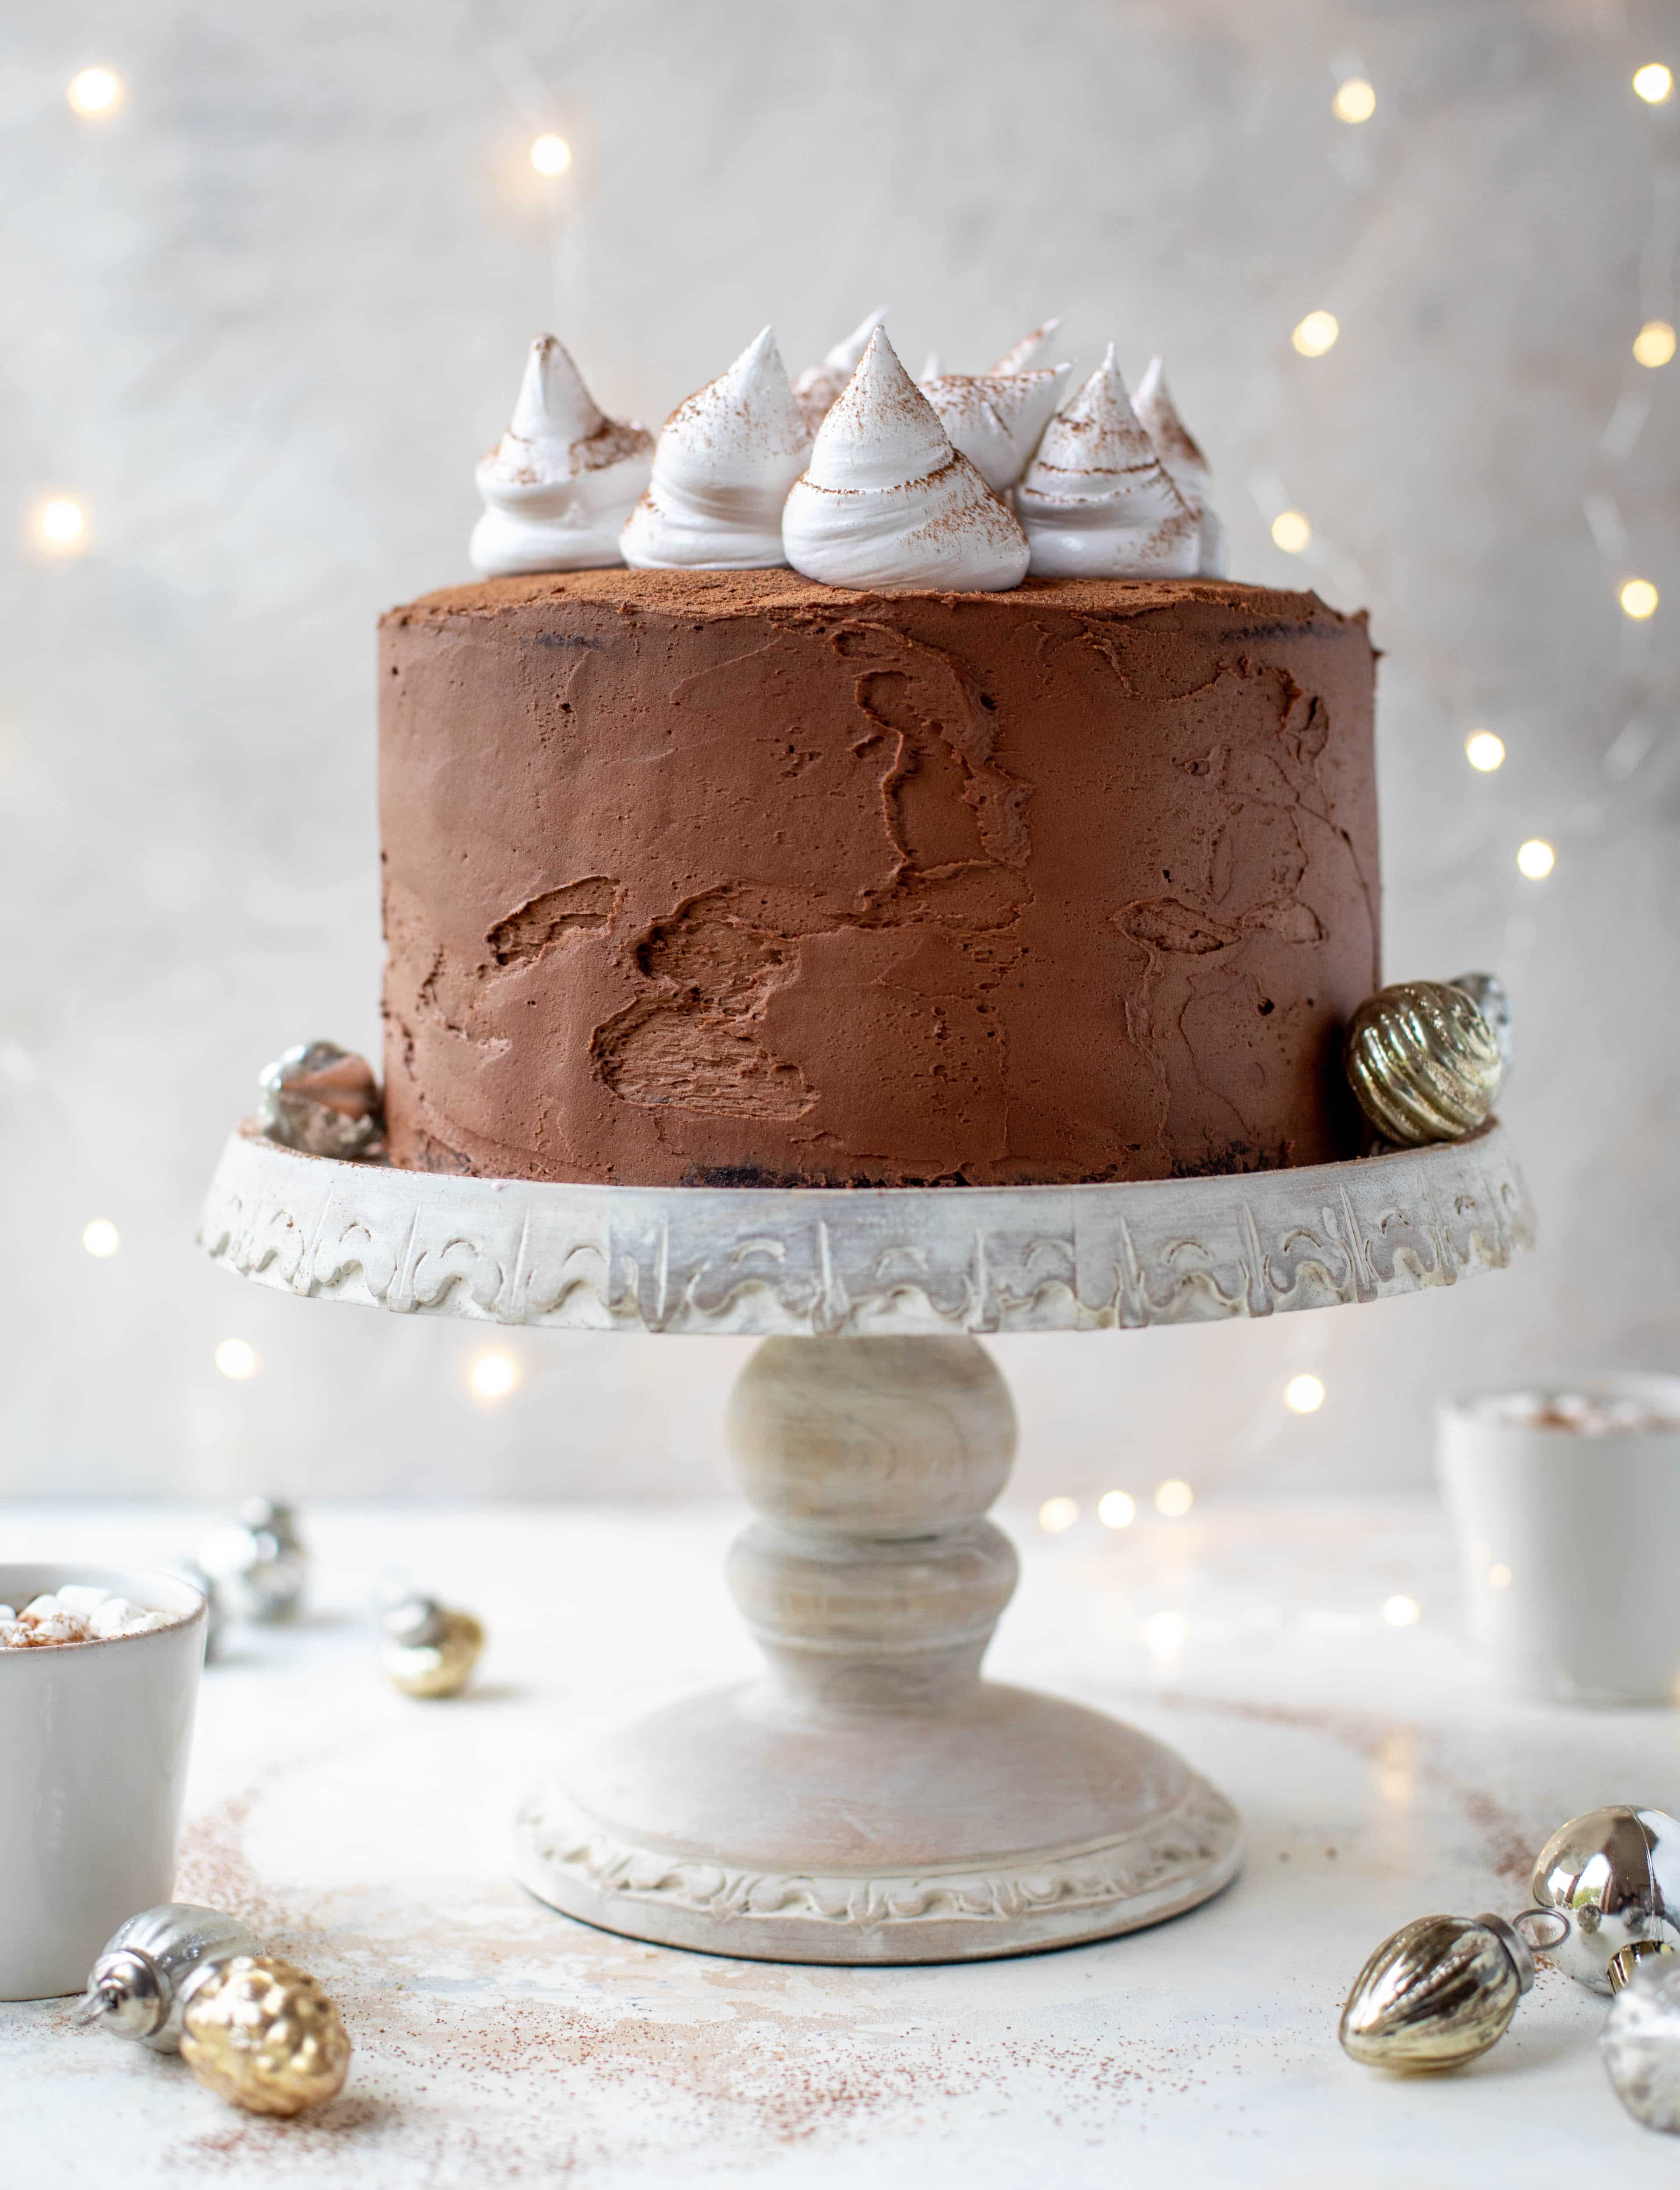 http://www.howsweeteats.com/wp-content/uploads/2019/12/hot-cocoa-cake-24.jpg